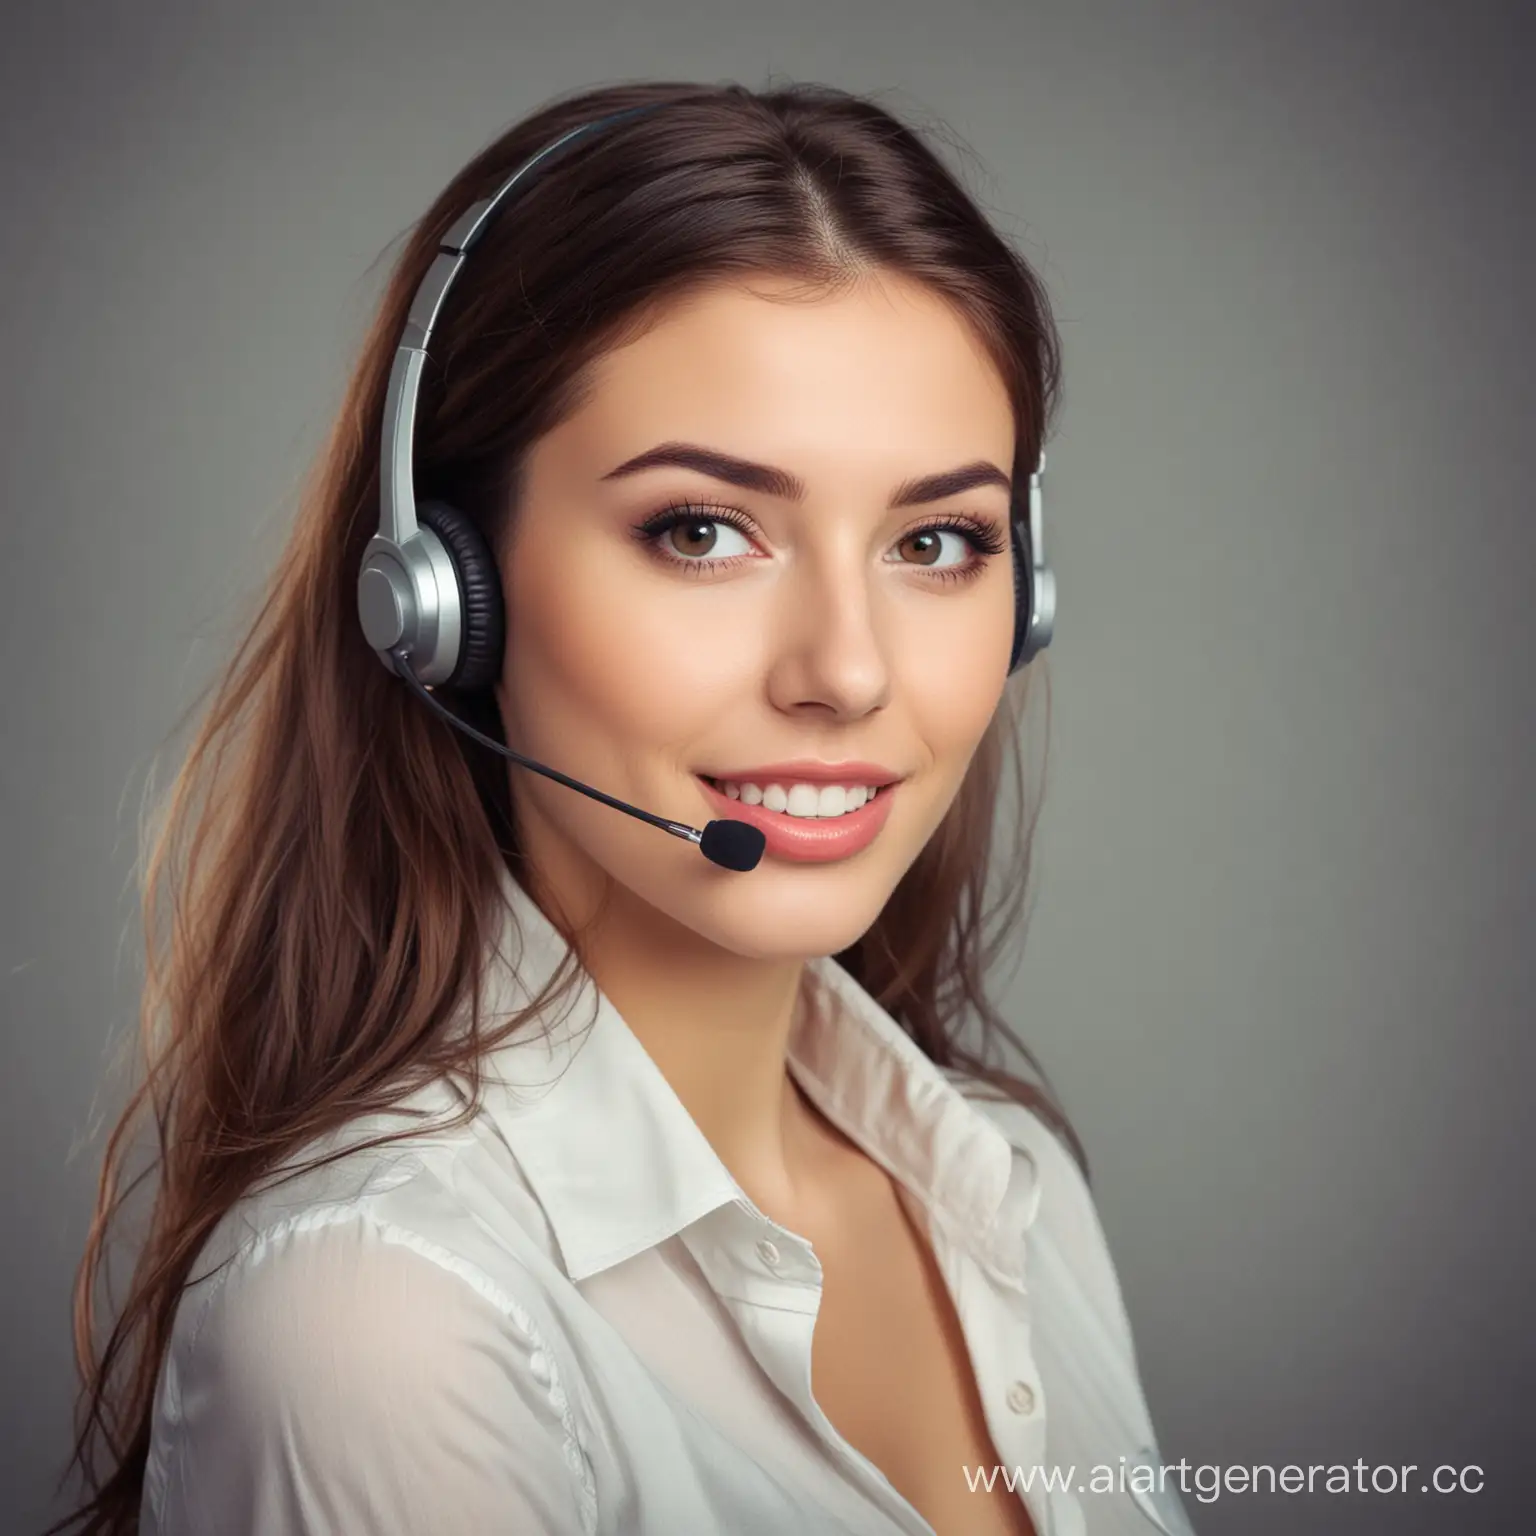 Smiling-Call-Center-Beauty-with-Headset